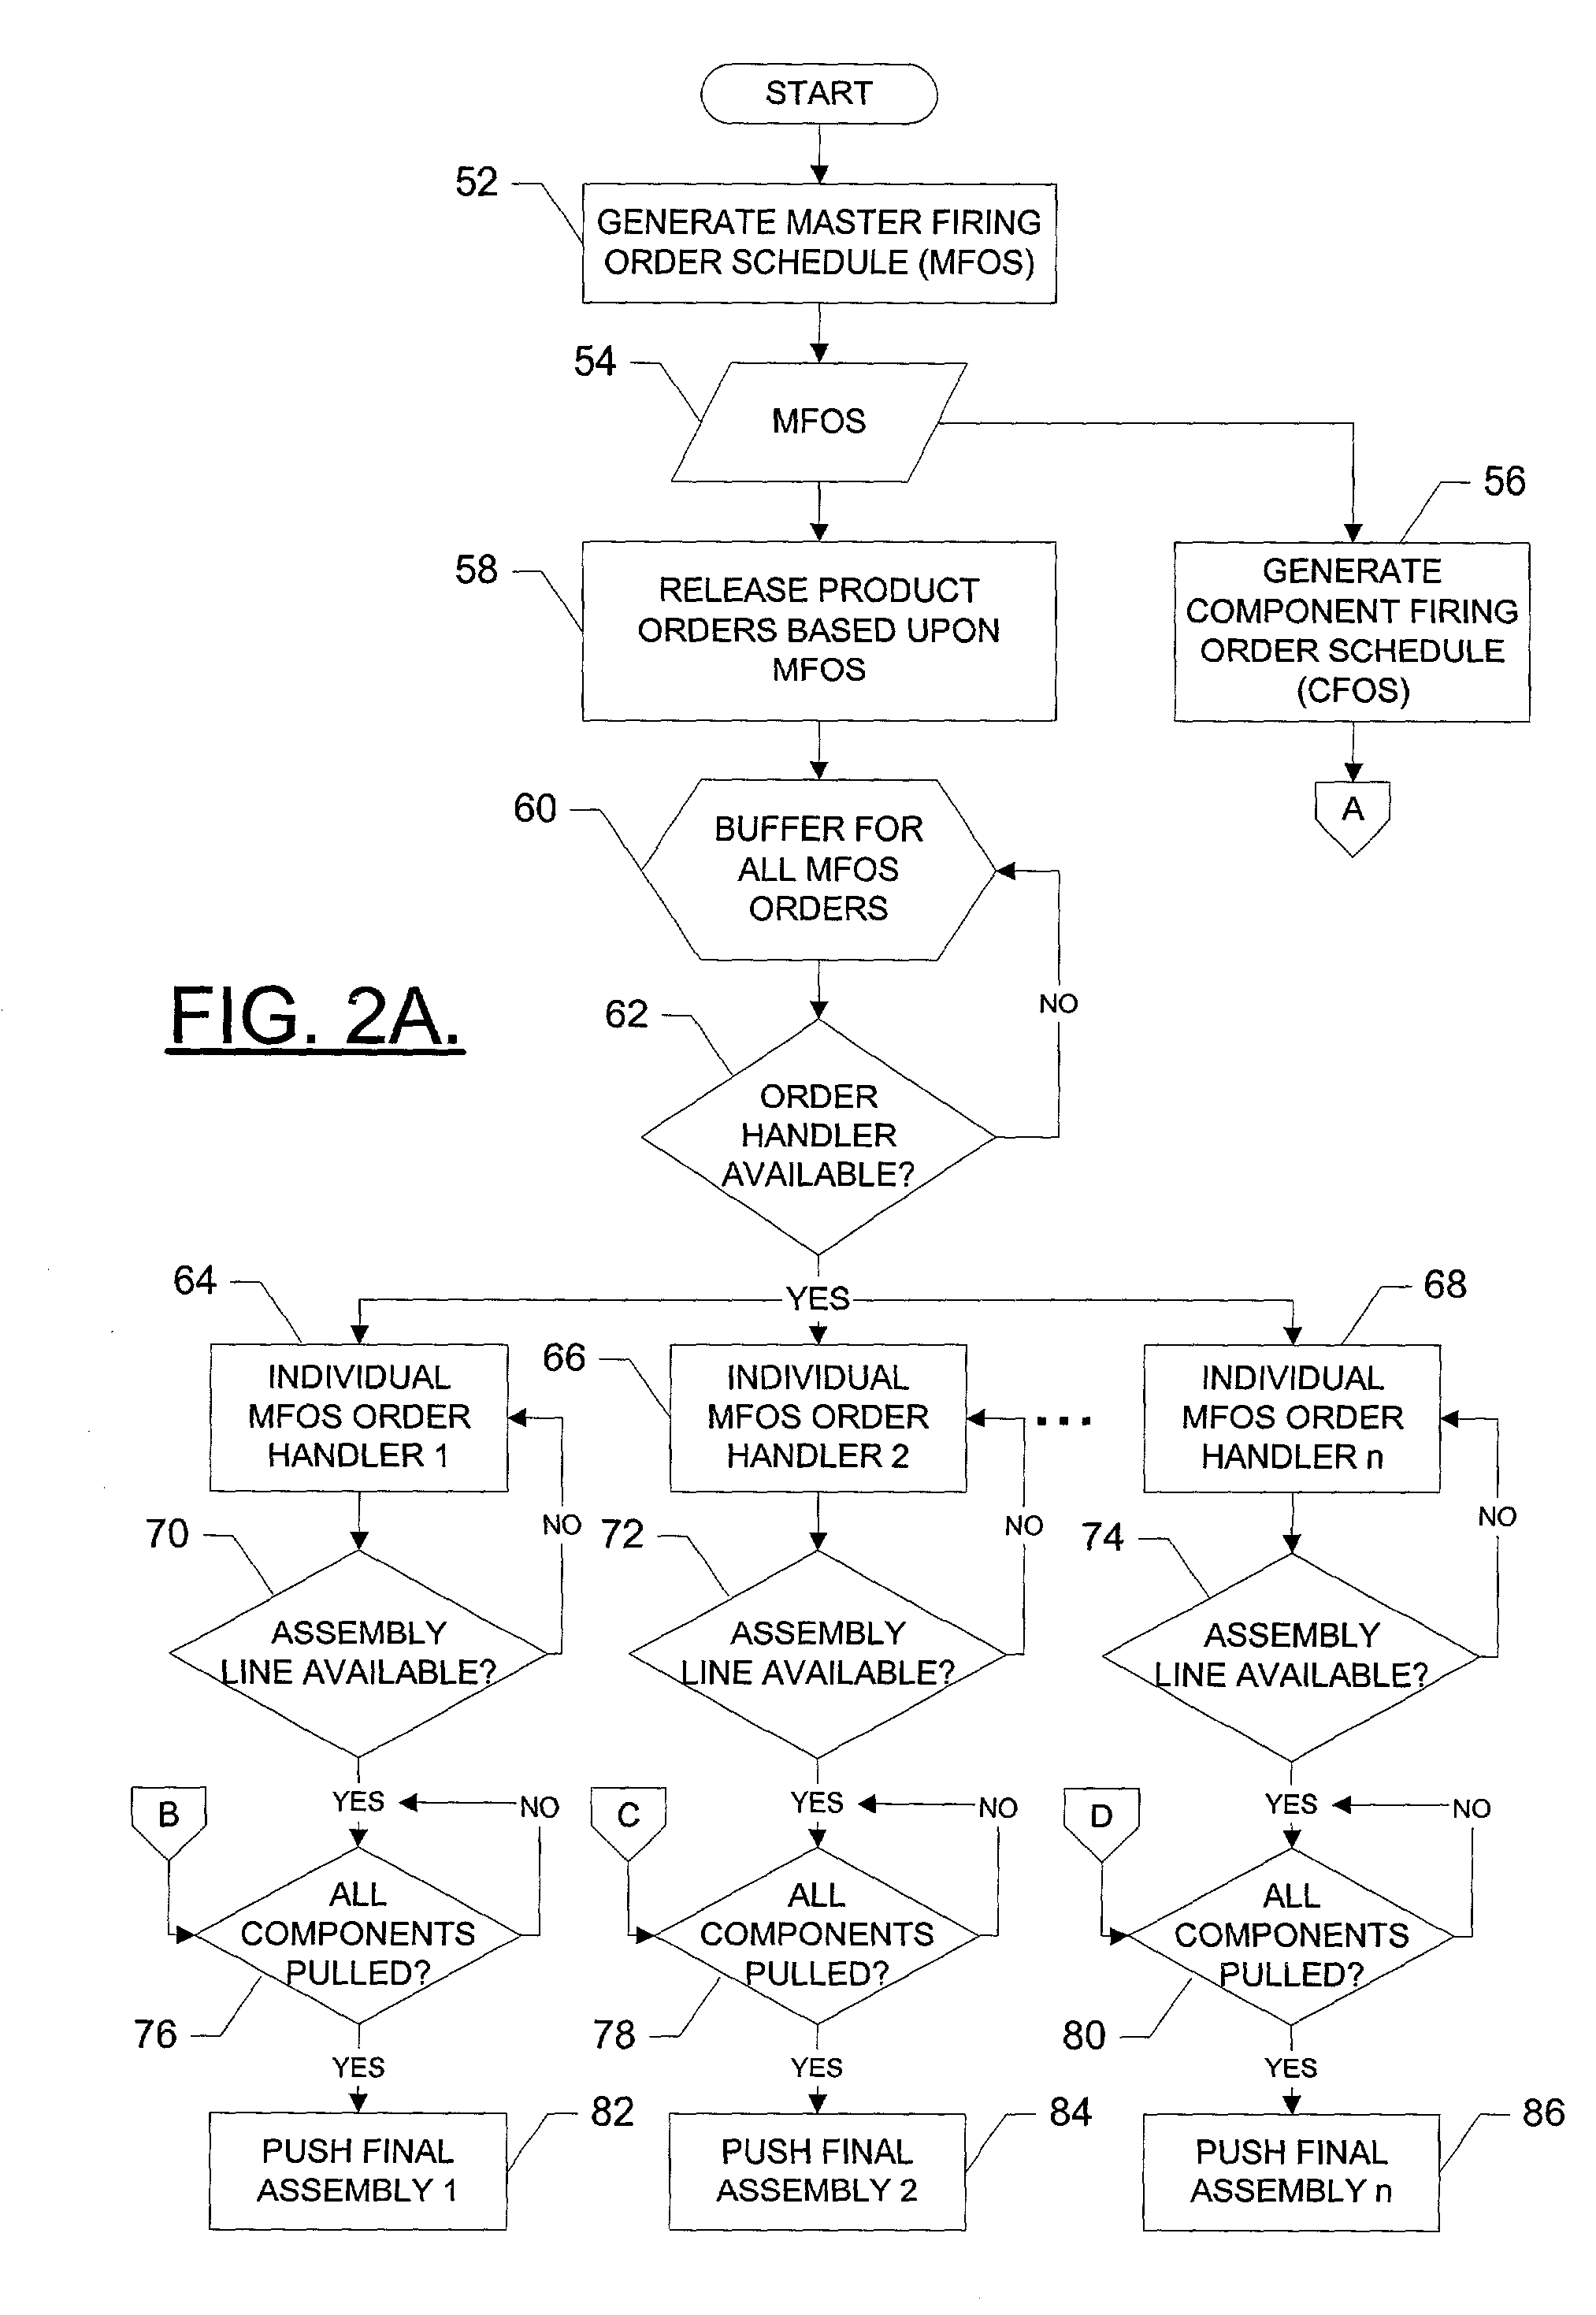 Systems and methods for manufacturing a product in a pull and push manufacturing system and associated methods and computer program products for modeling the same